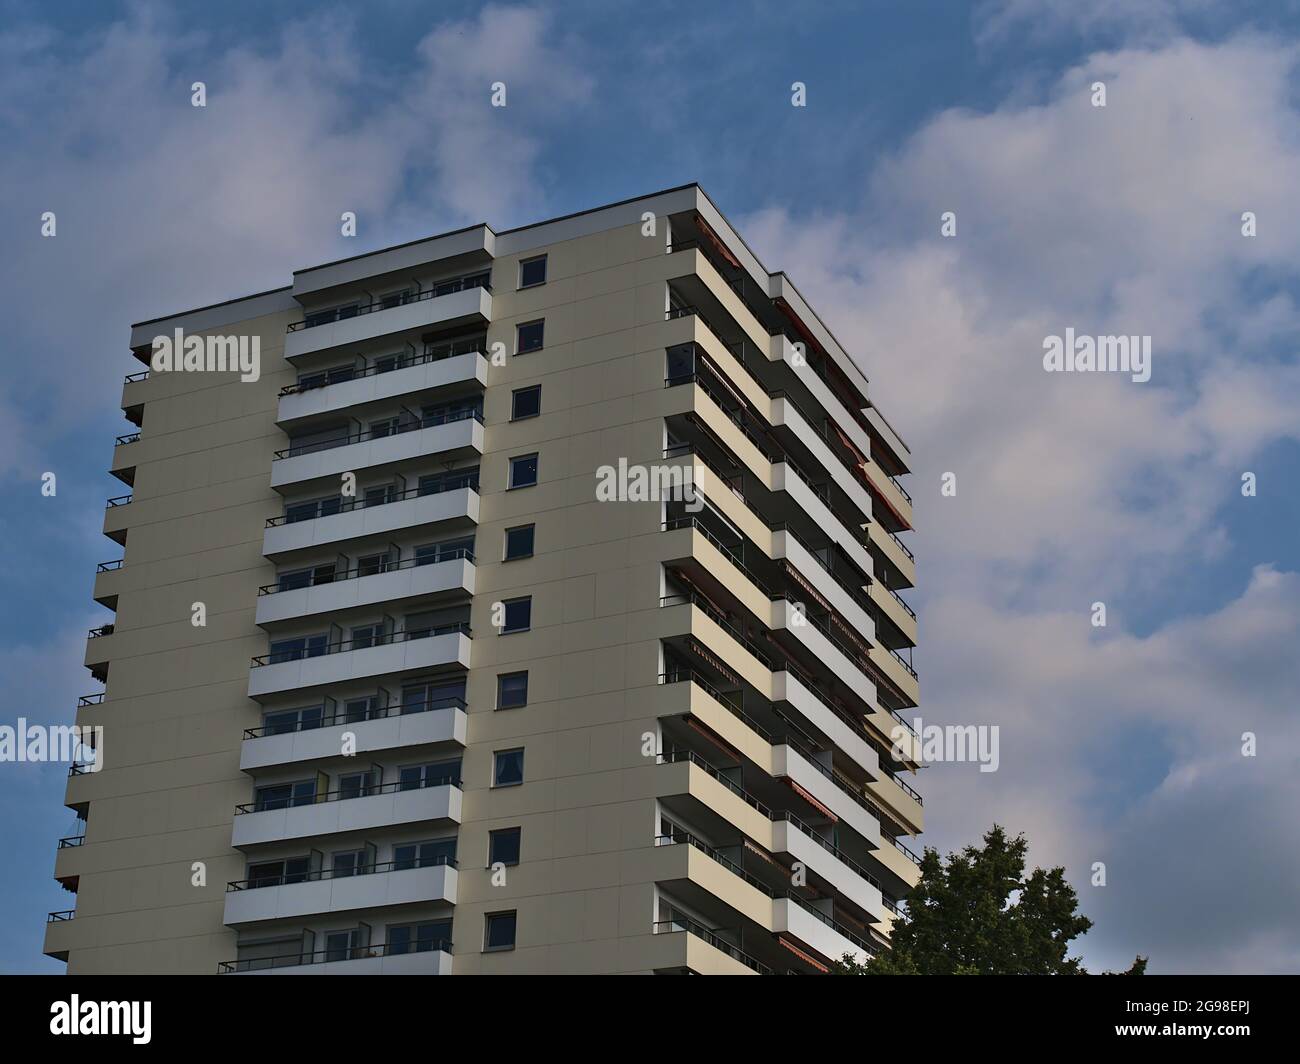 Low angle view of typical residential multi-family high-rise building with apartments and balconies built ca. 1970 on sunny summer day with blue sky. Stock Photo